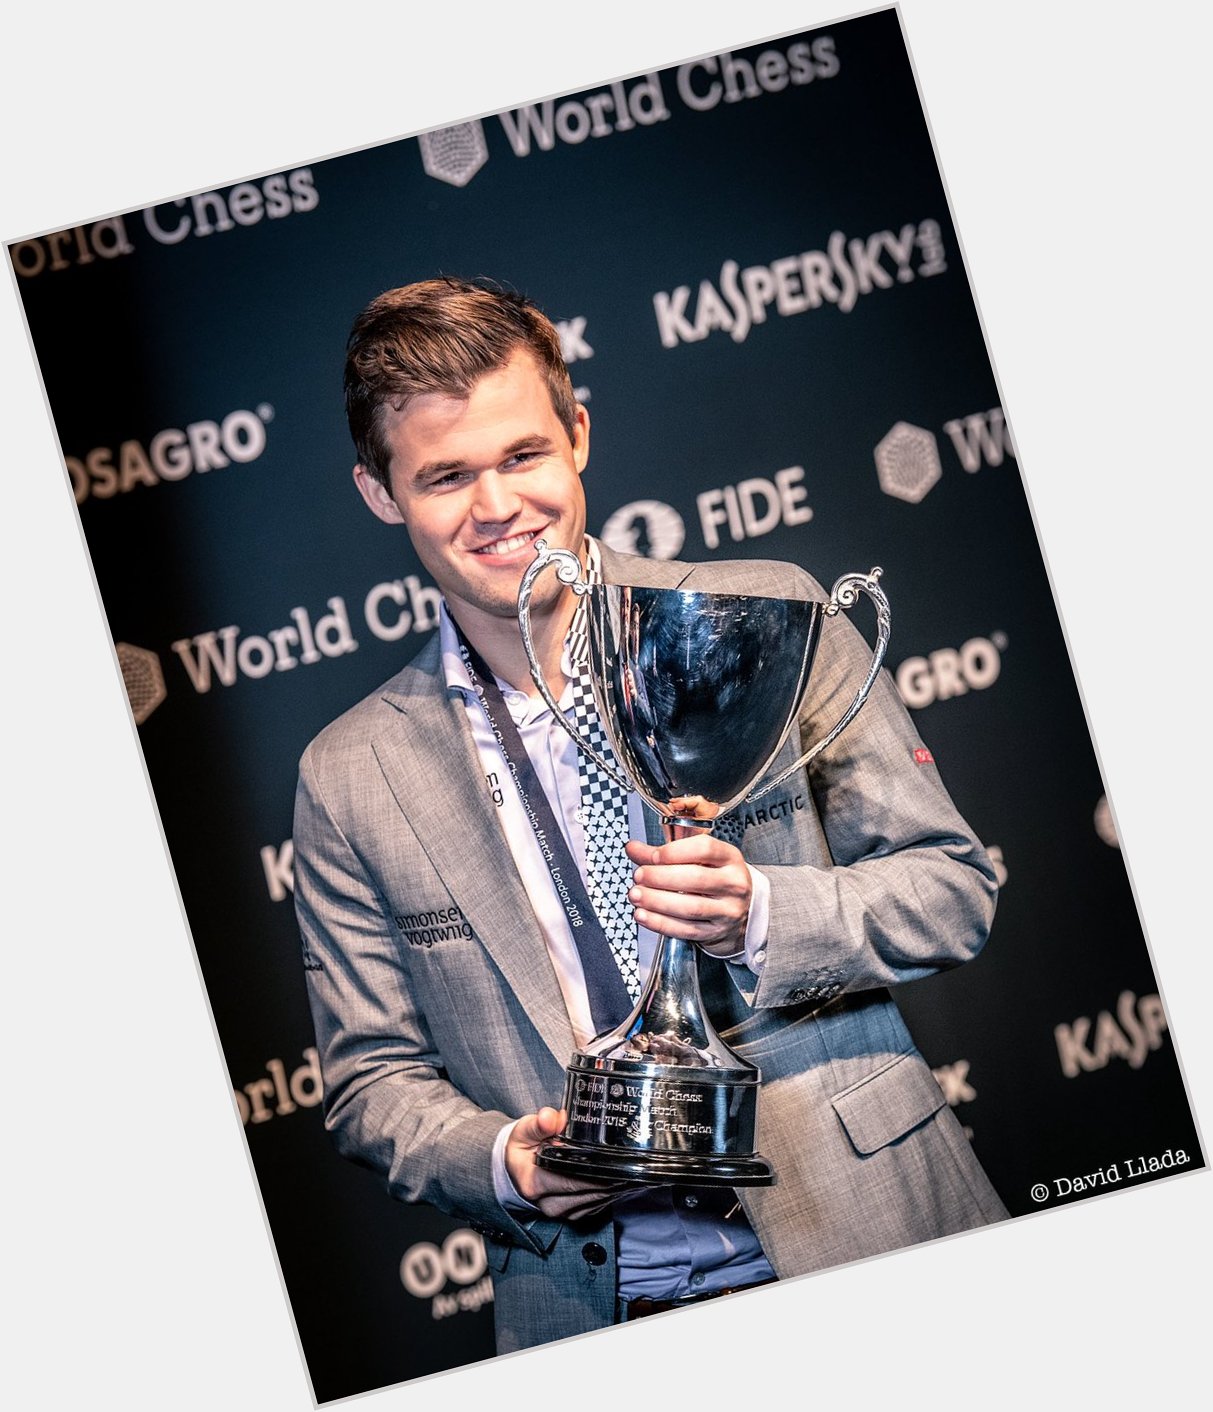 The four-time World Chess Champion Magnus Carlsen turns 28 today. Happy birthday, 